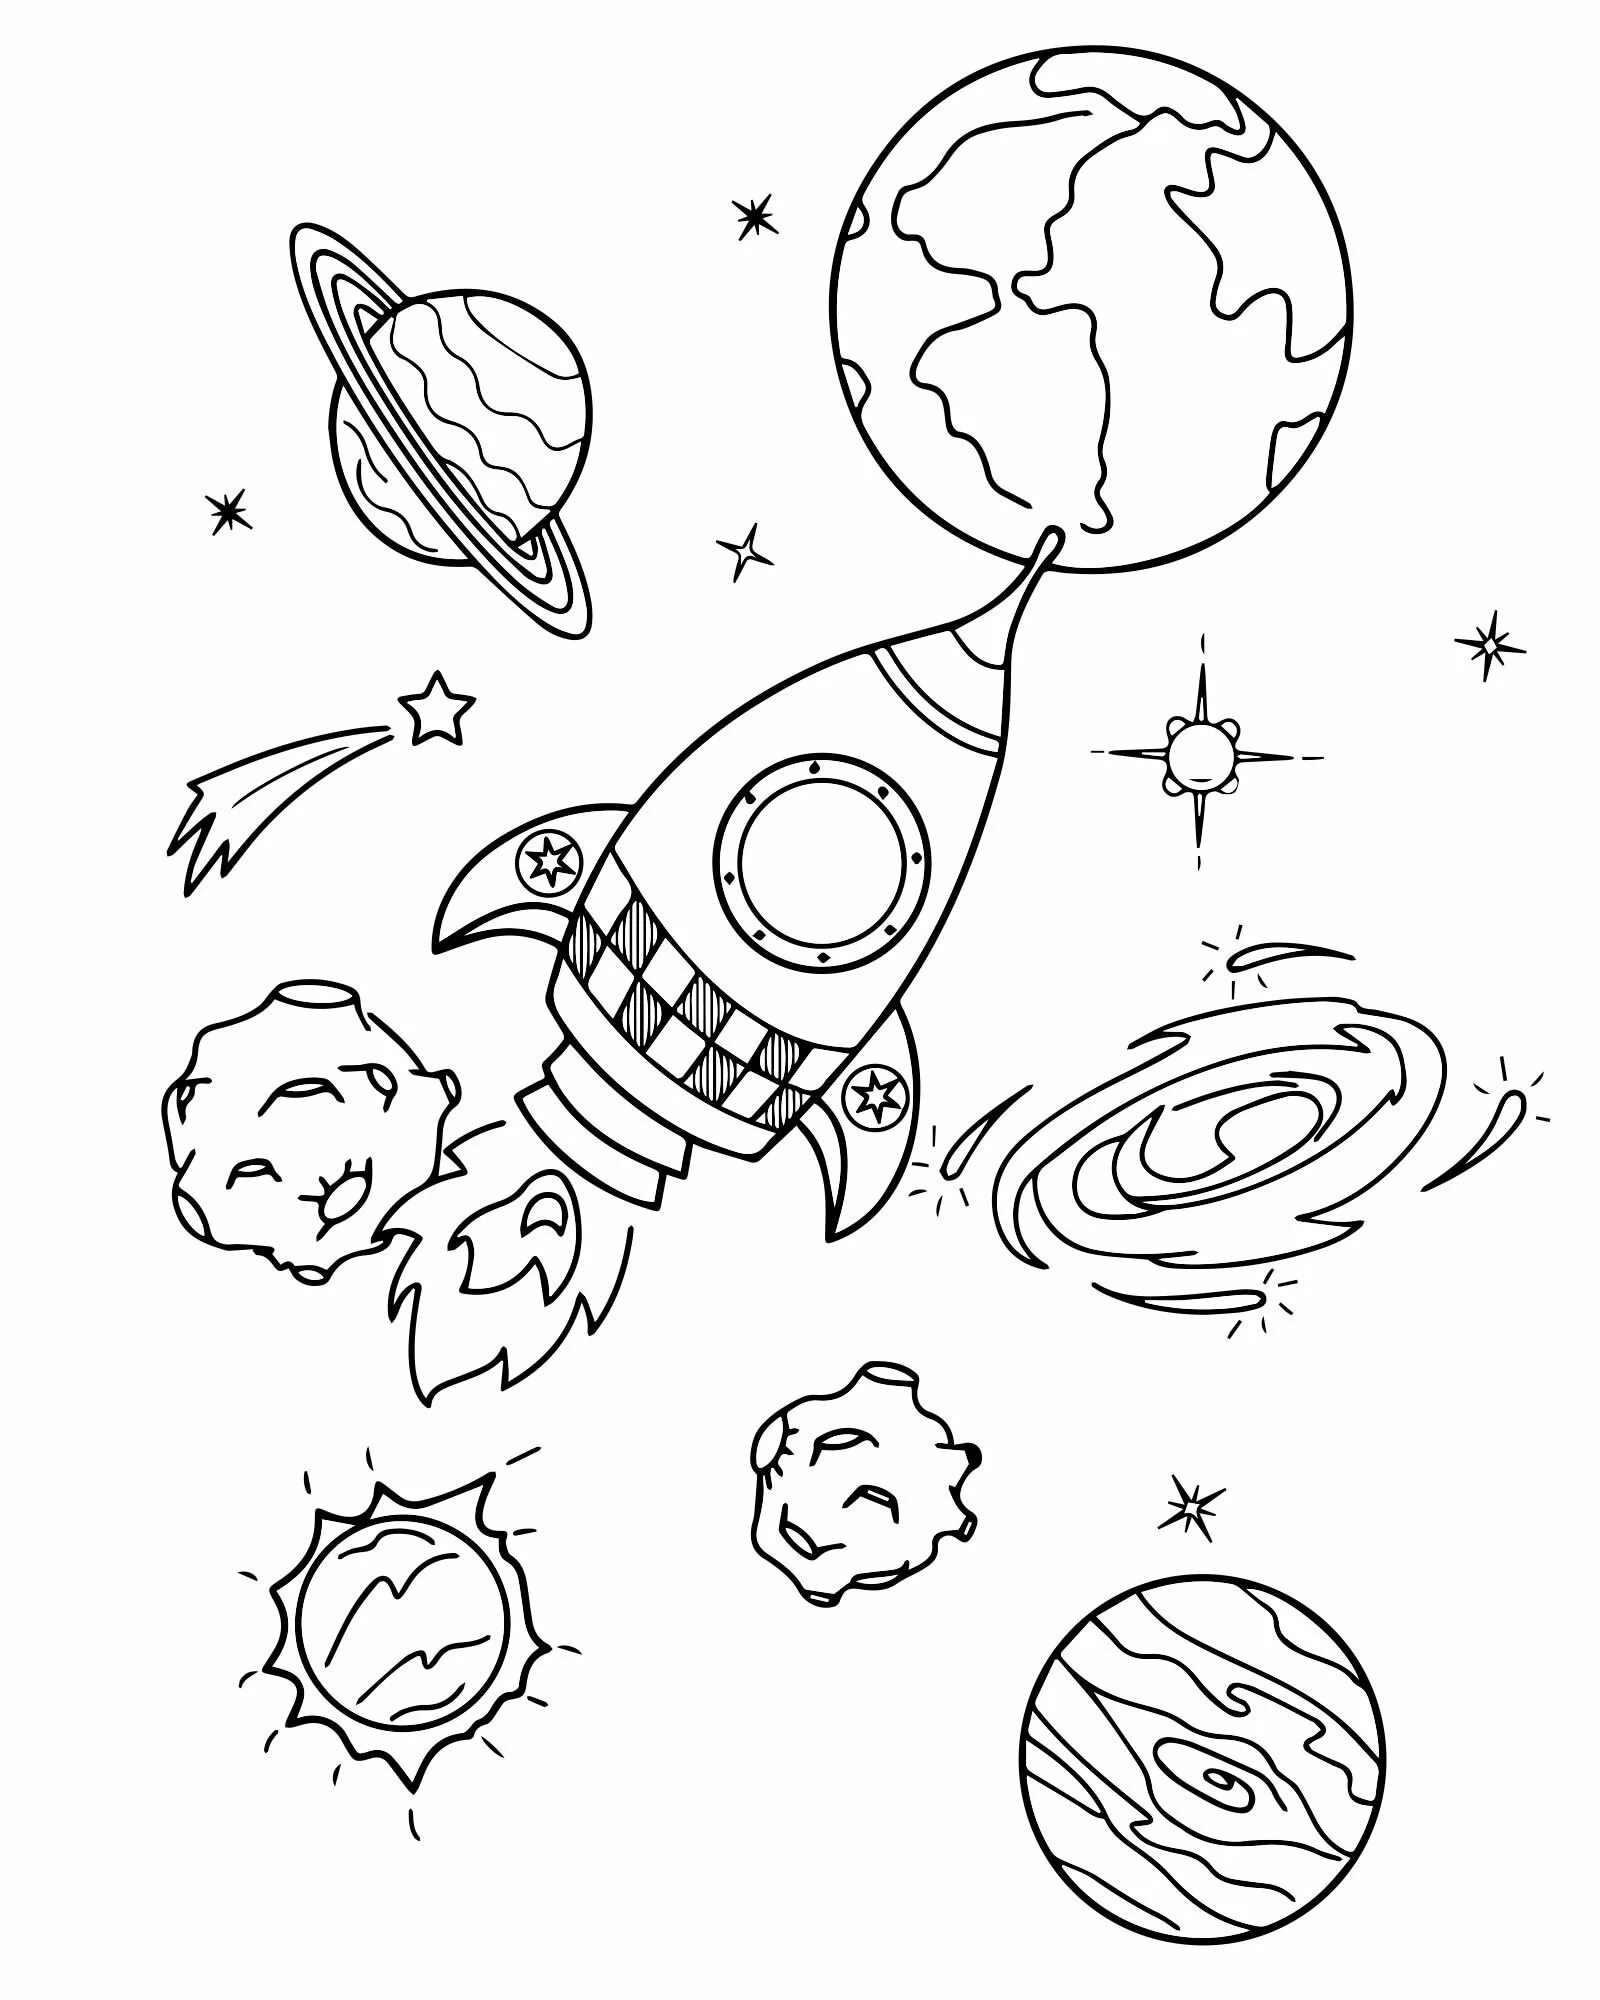 Incredible stars coloring book for 4-5 year olds